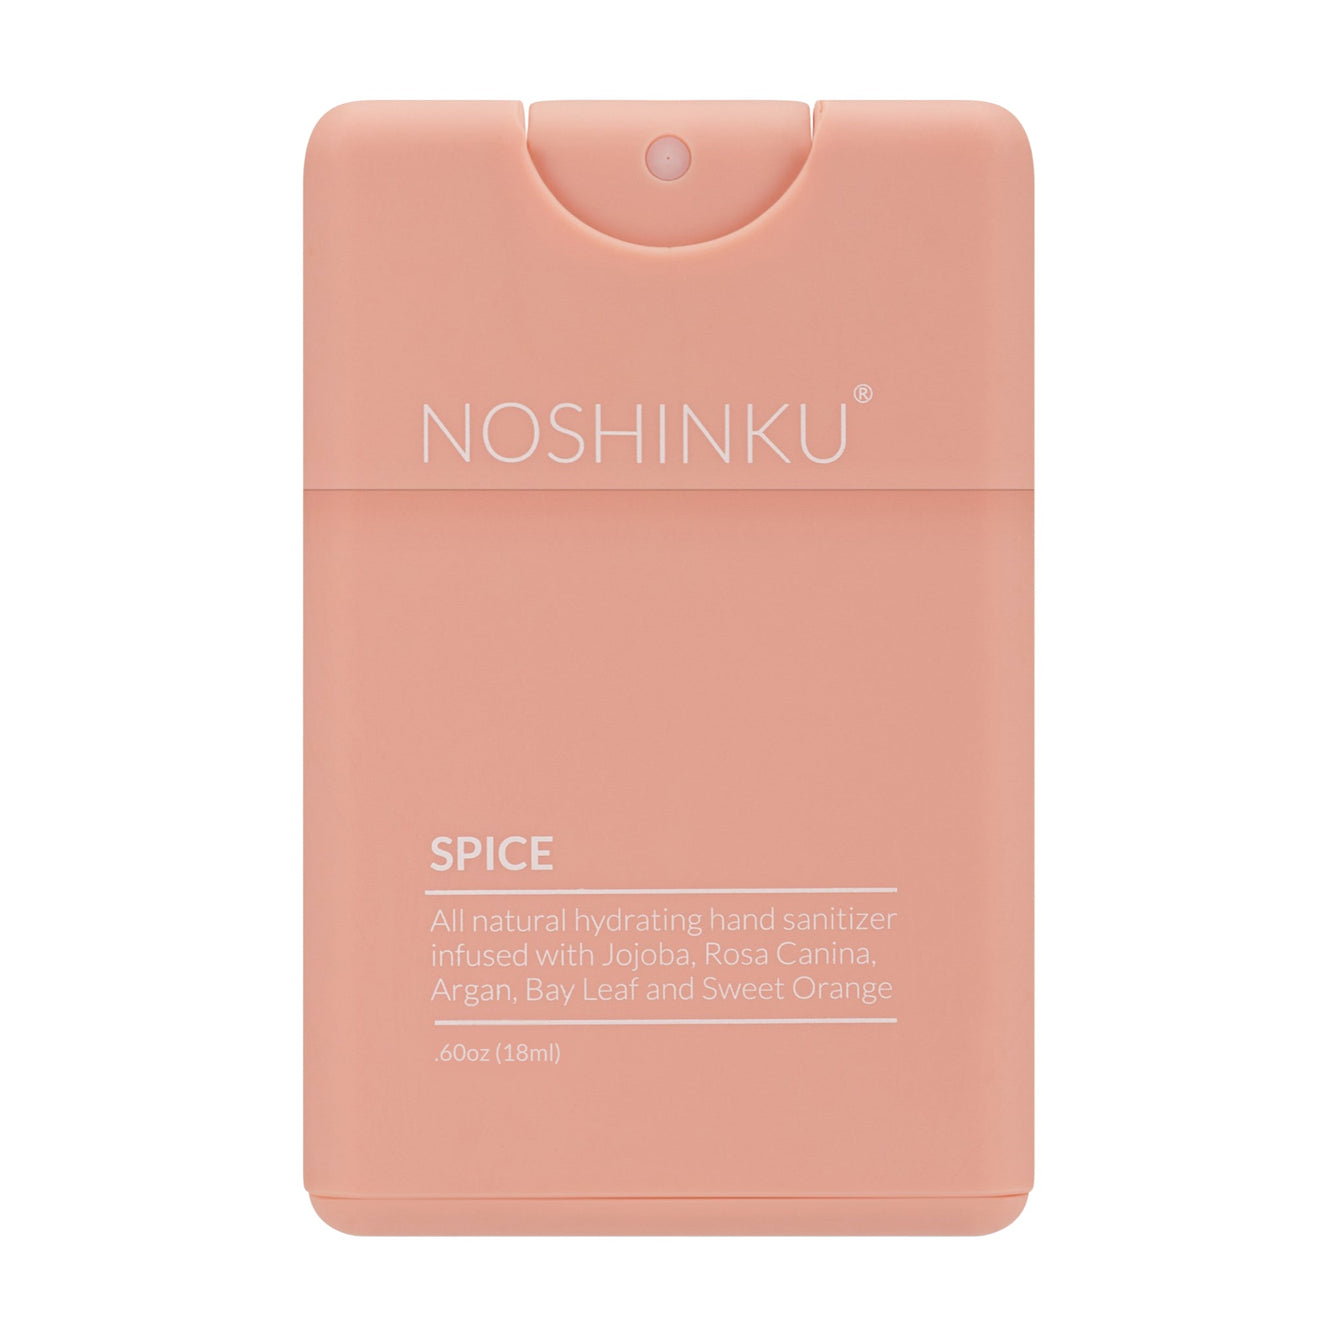 Noshinku Organic Spice Refillable Hydrating Pocket Hand Sanitizer. Infused with Organic Sweet Orange, Bayleaf and Coriander. Moisturizing All Natural blends in stylish, sustainable, and pocket friendly misters designed to be refilled. Tough on germs; good for skin; good for the earth. All natural, effective and synthetic free.